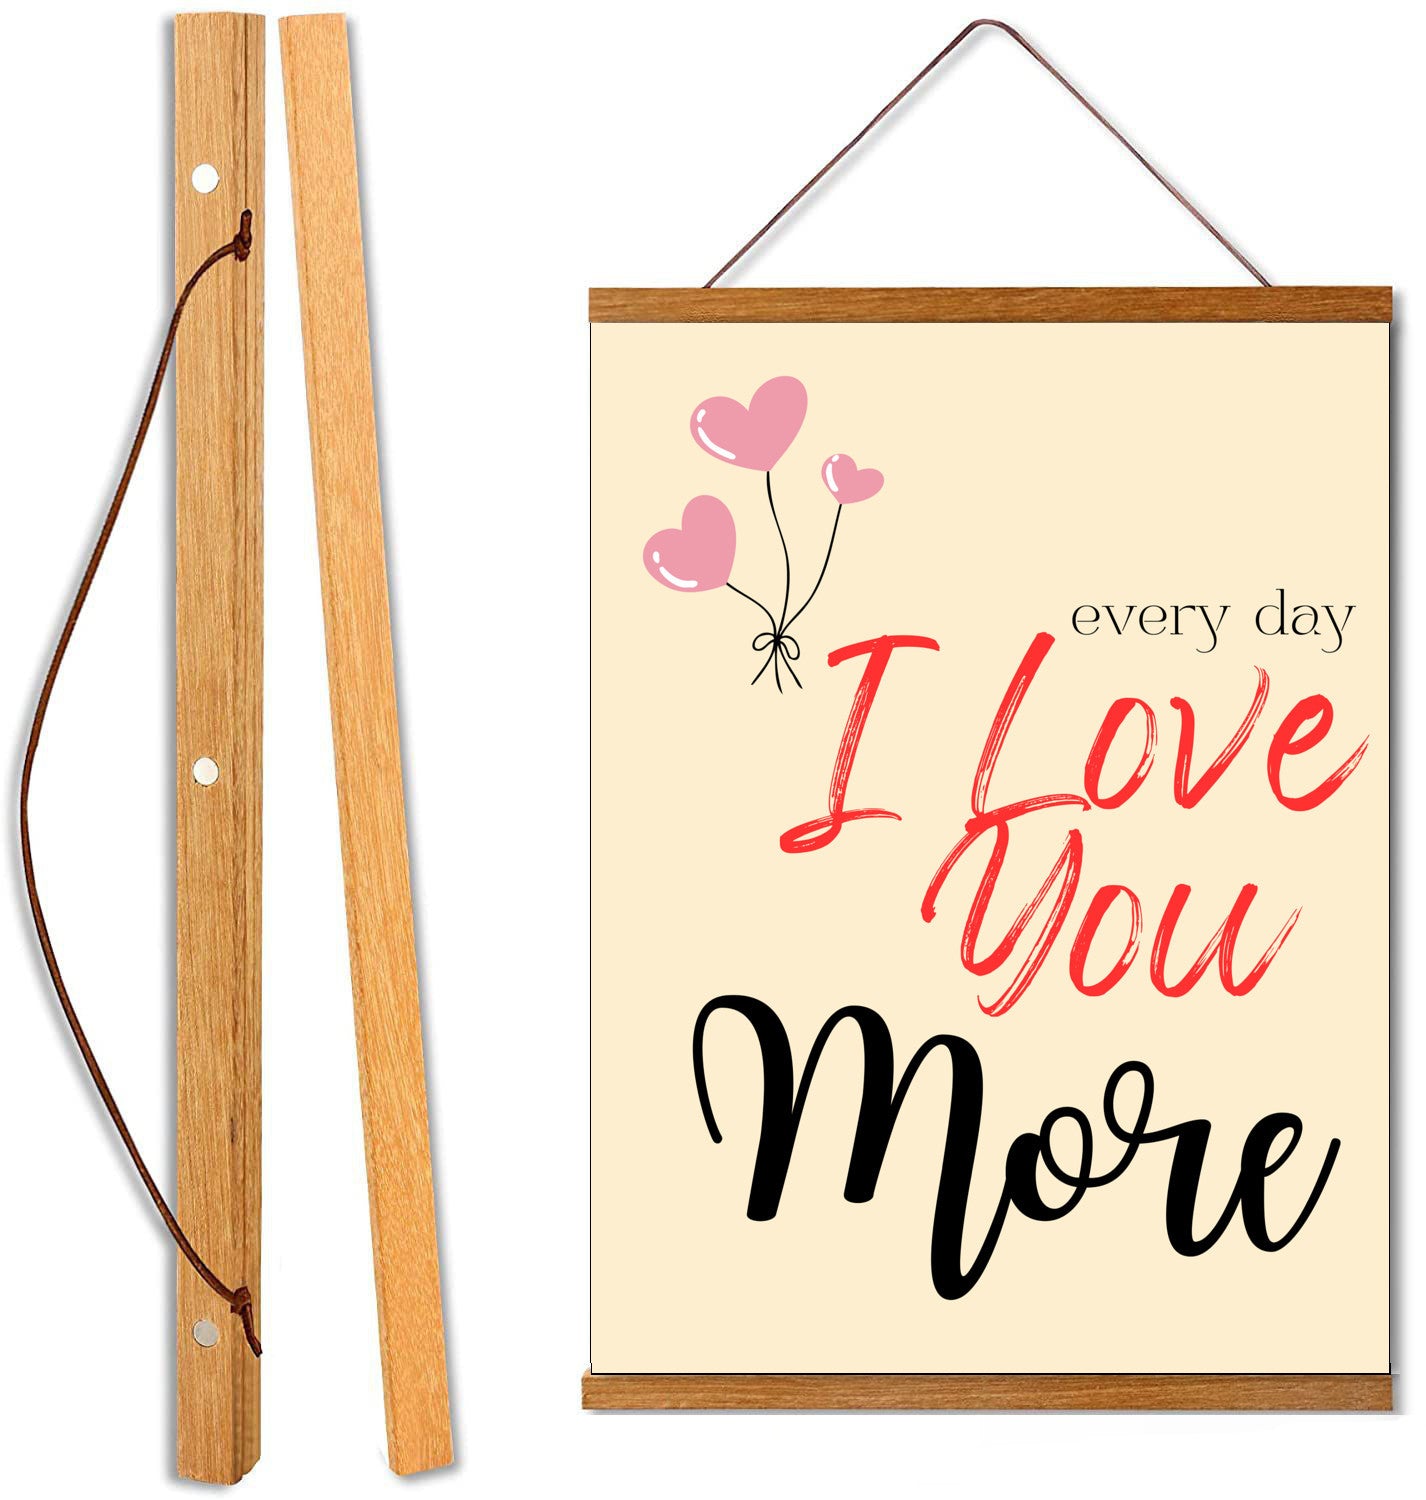 Every Day I Love You More - canvas sign